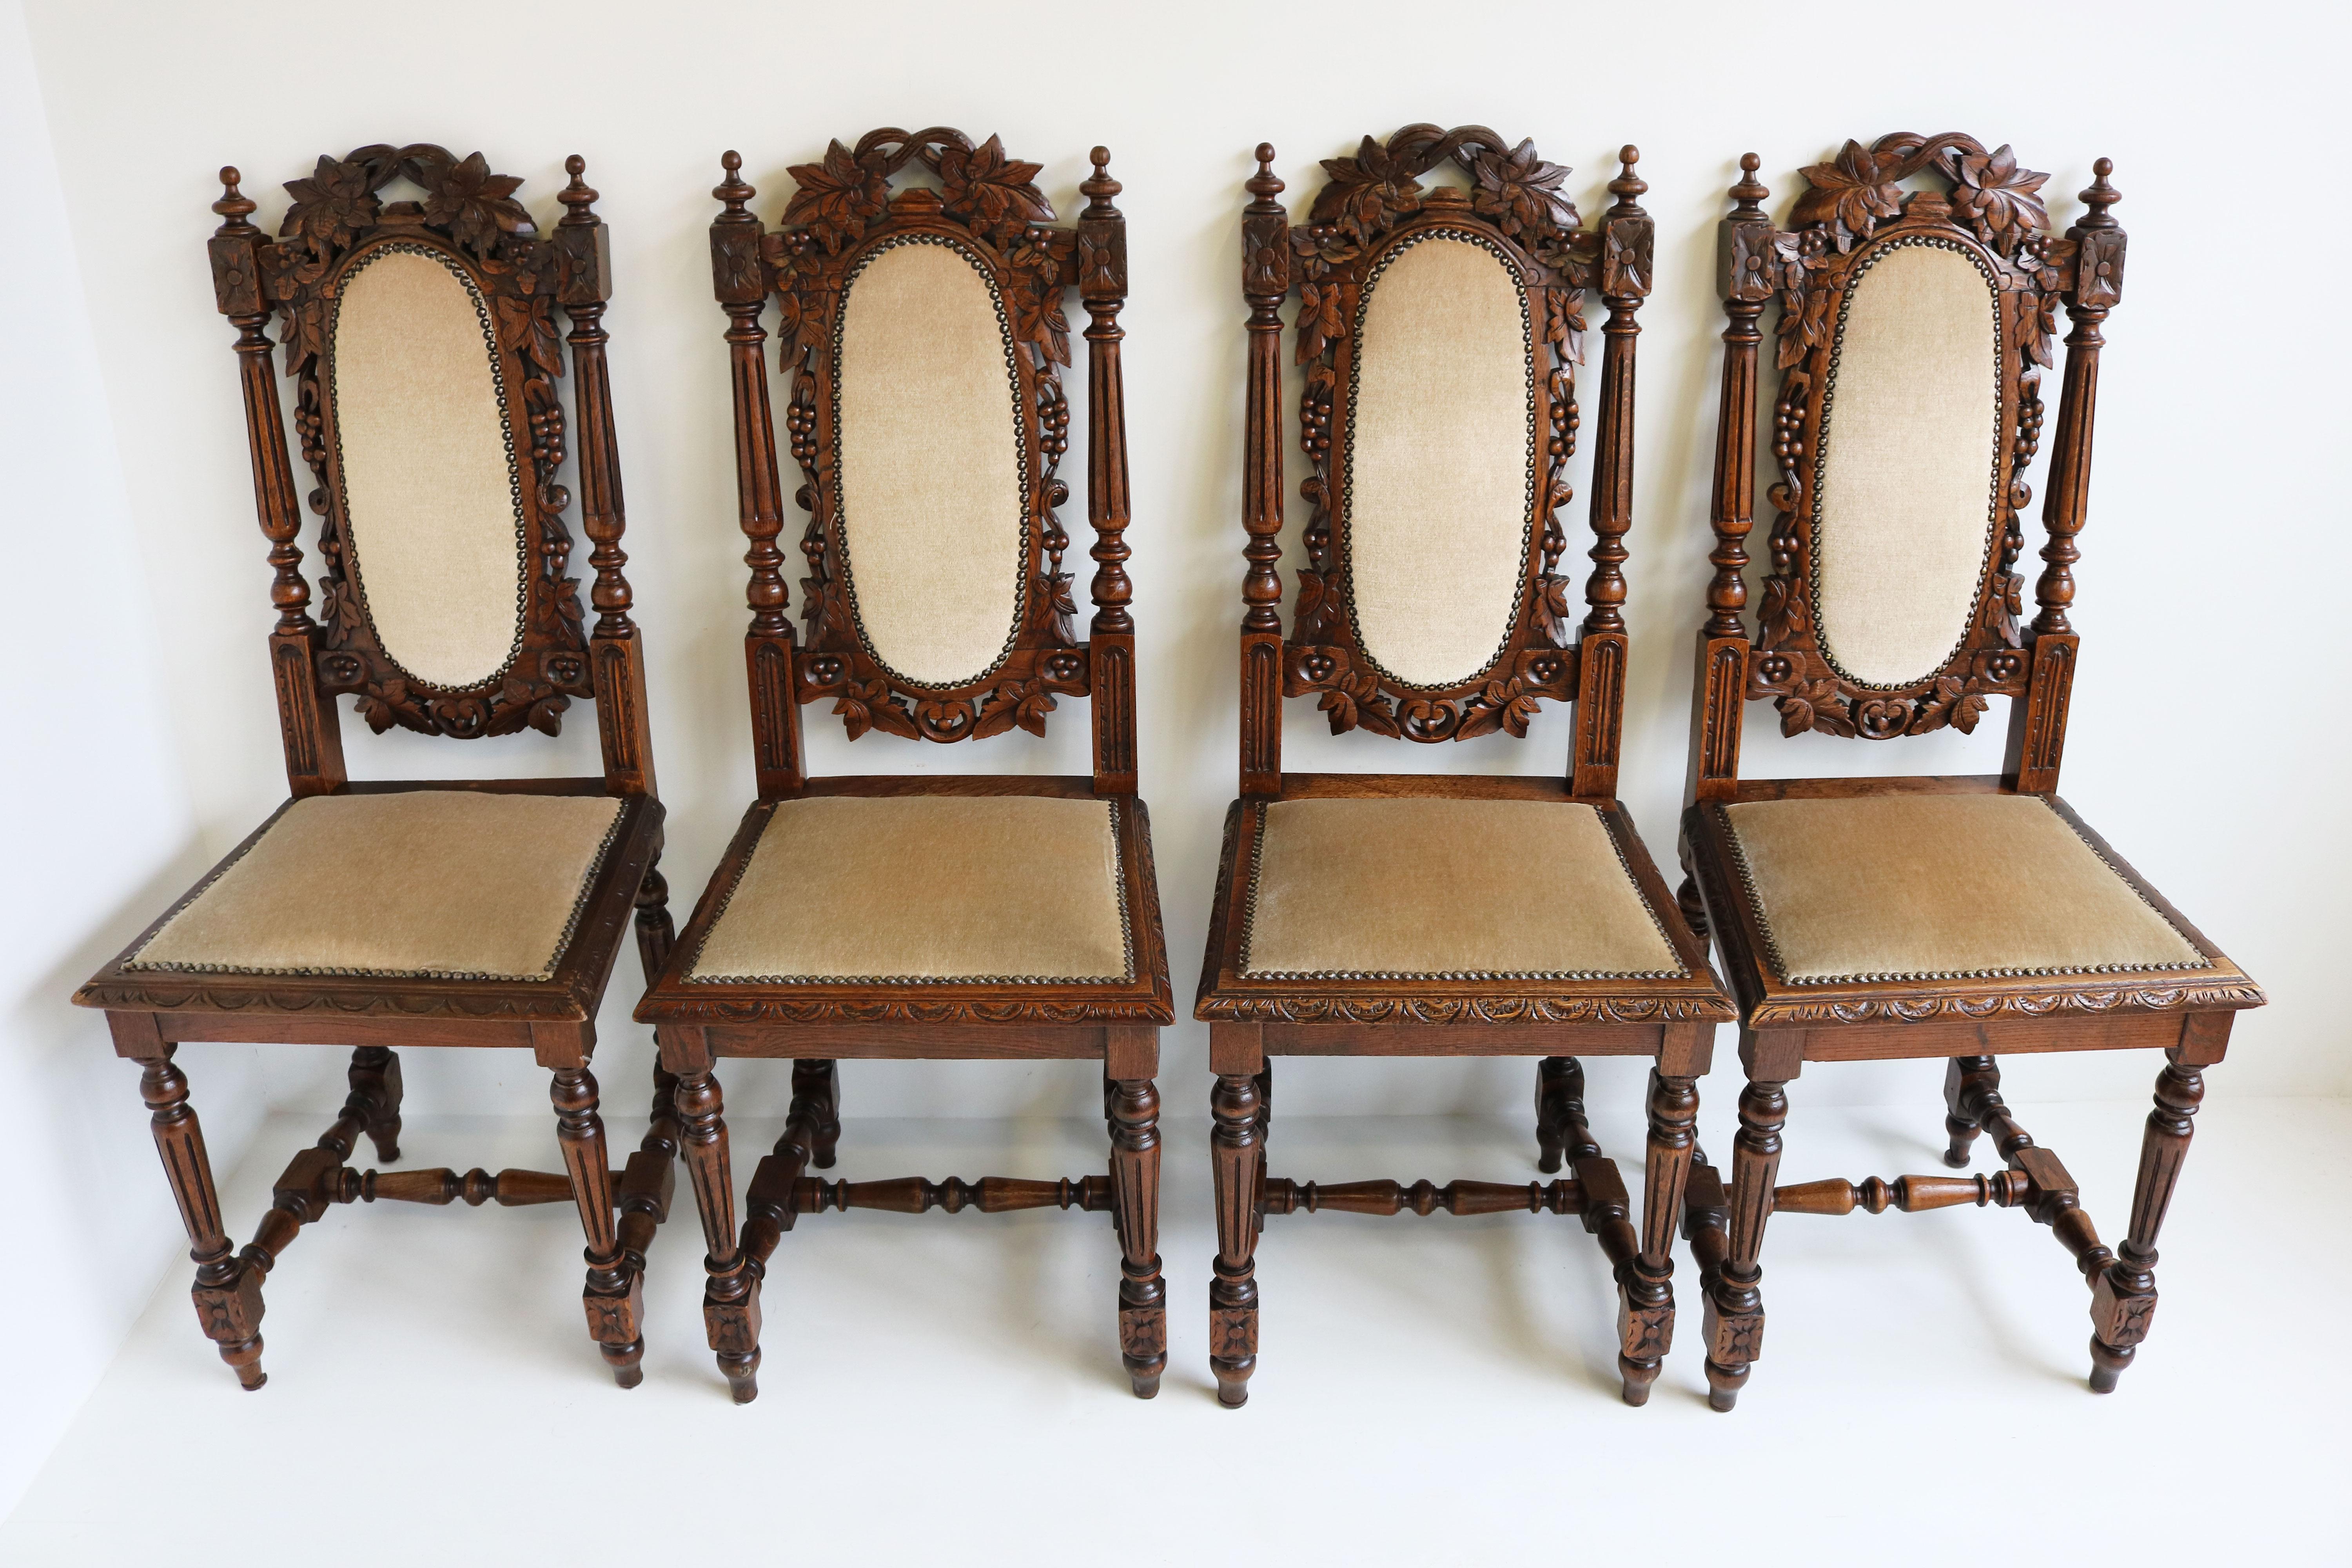 Stylish set of 4 French Renaissance Revival Dining chairs with impressive high backs from the 1860s. 
Fully made out of solid oak & carved by hand by a master carver with superb attention to detail. 
Decorated with rich details in the Black Forest